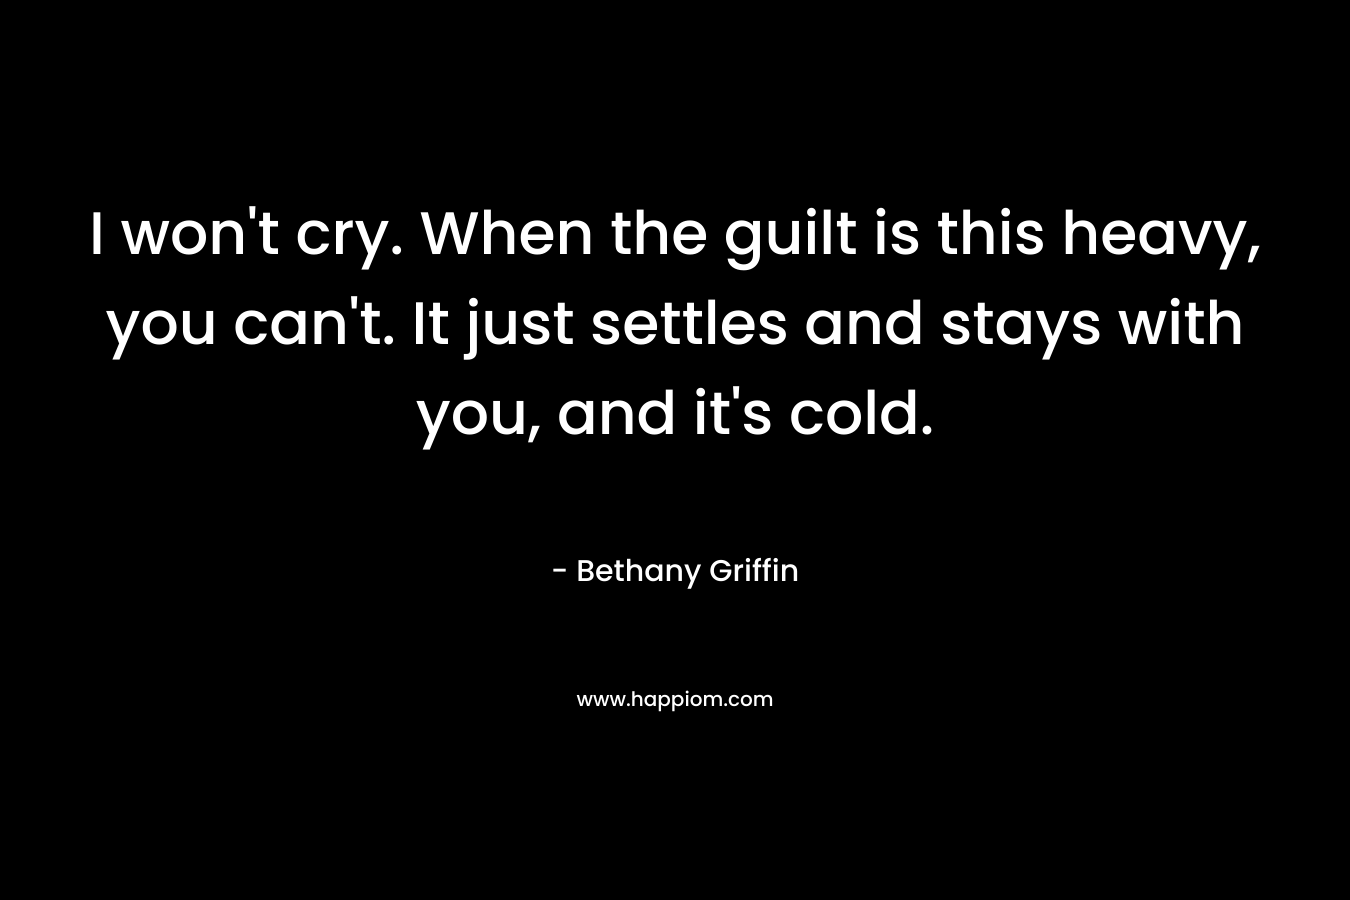 I won’t cry. When the guilt is this heavy, you can’t. It just settles and stays with you, and it’s cold. – Bethany Griffin